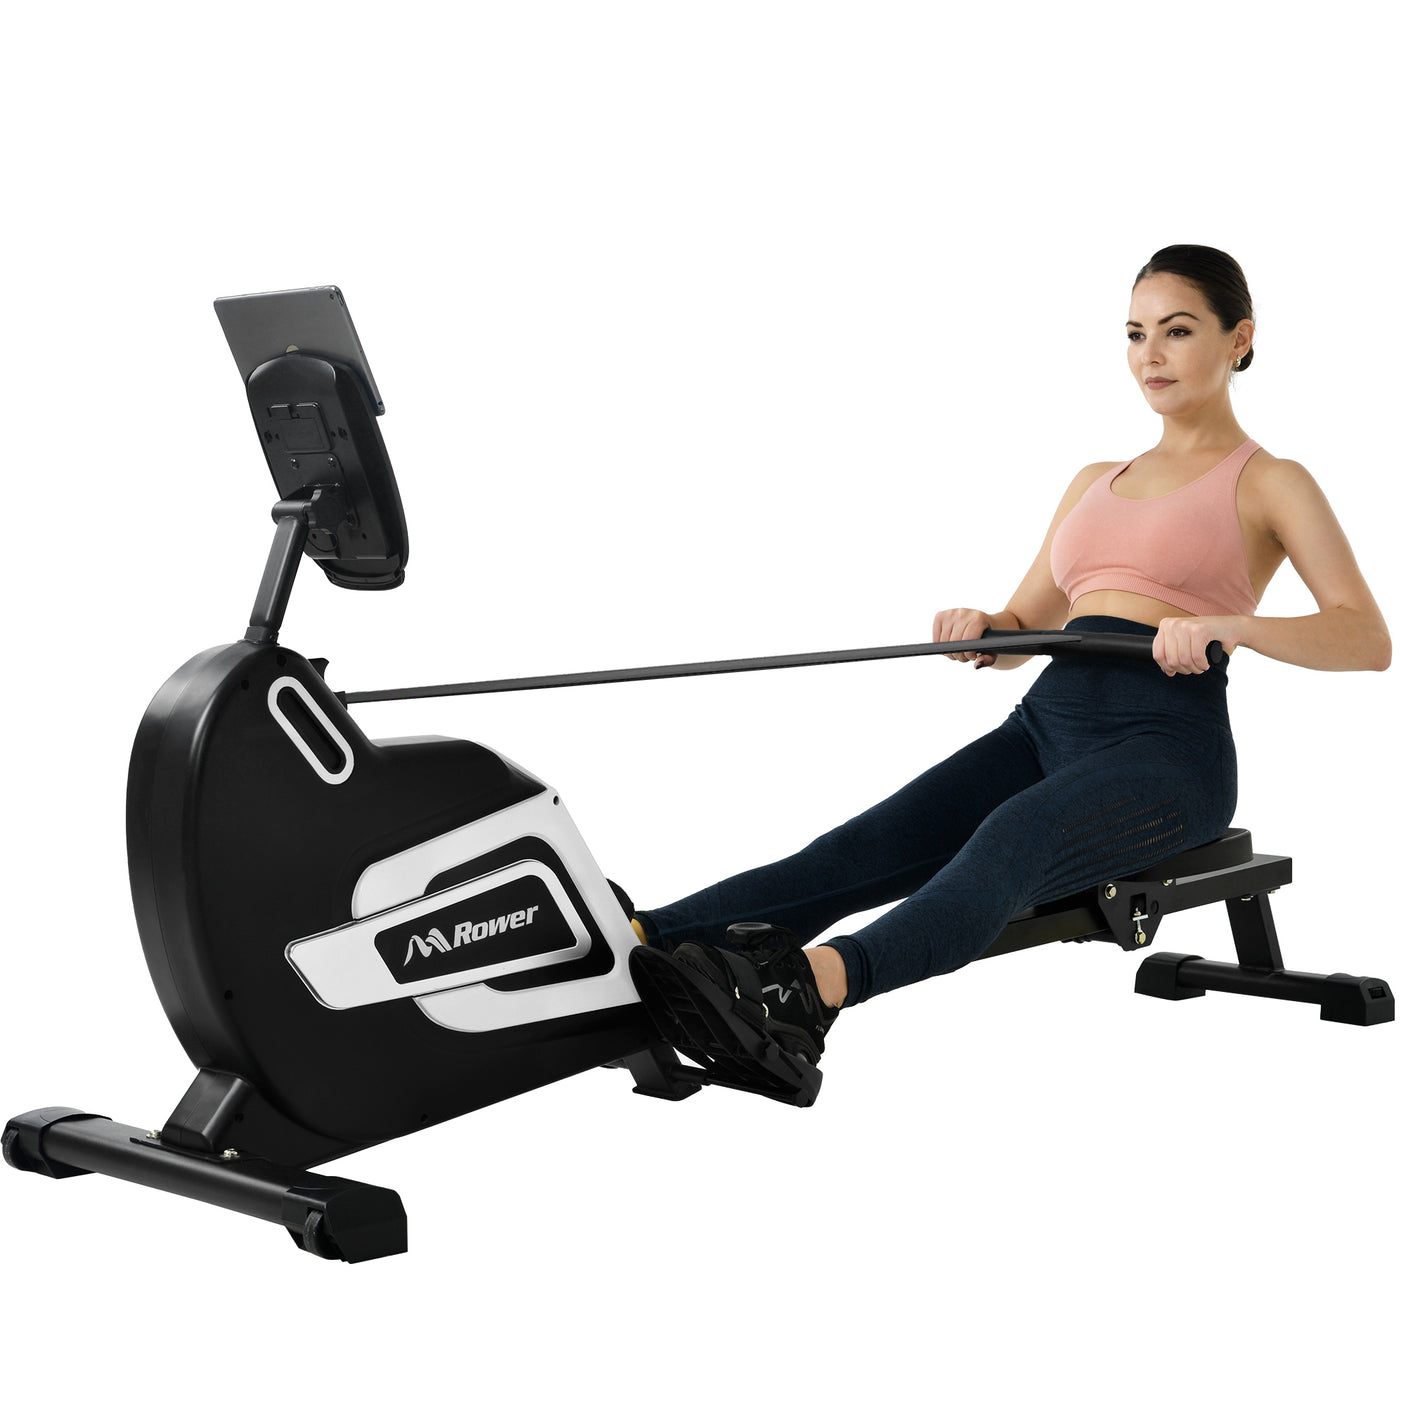 Magnetic Rowing Machine Folding Rower with 14 Level Resistance Adjustable, LCD Monitor and Tablet Holder for Foldable Rower Home Gym Cardio Workout